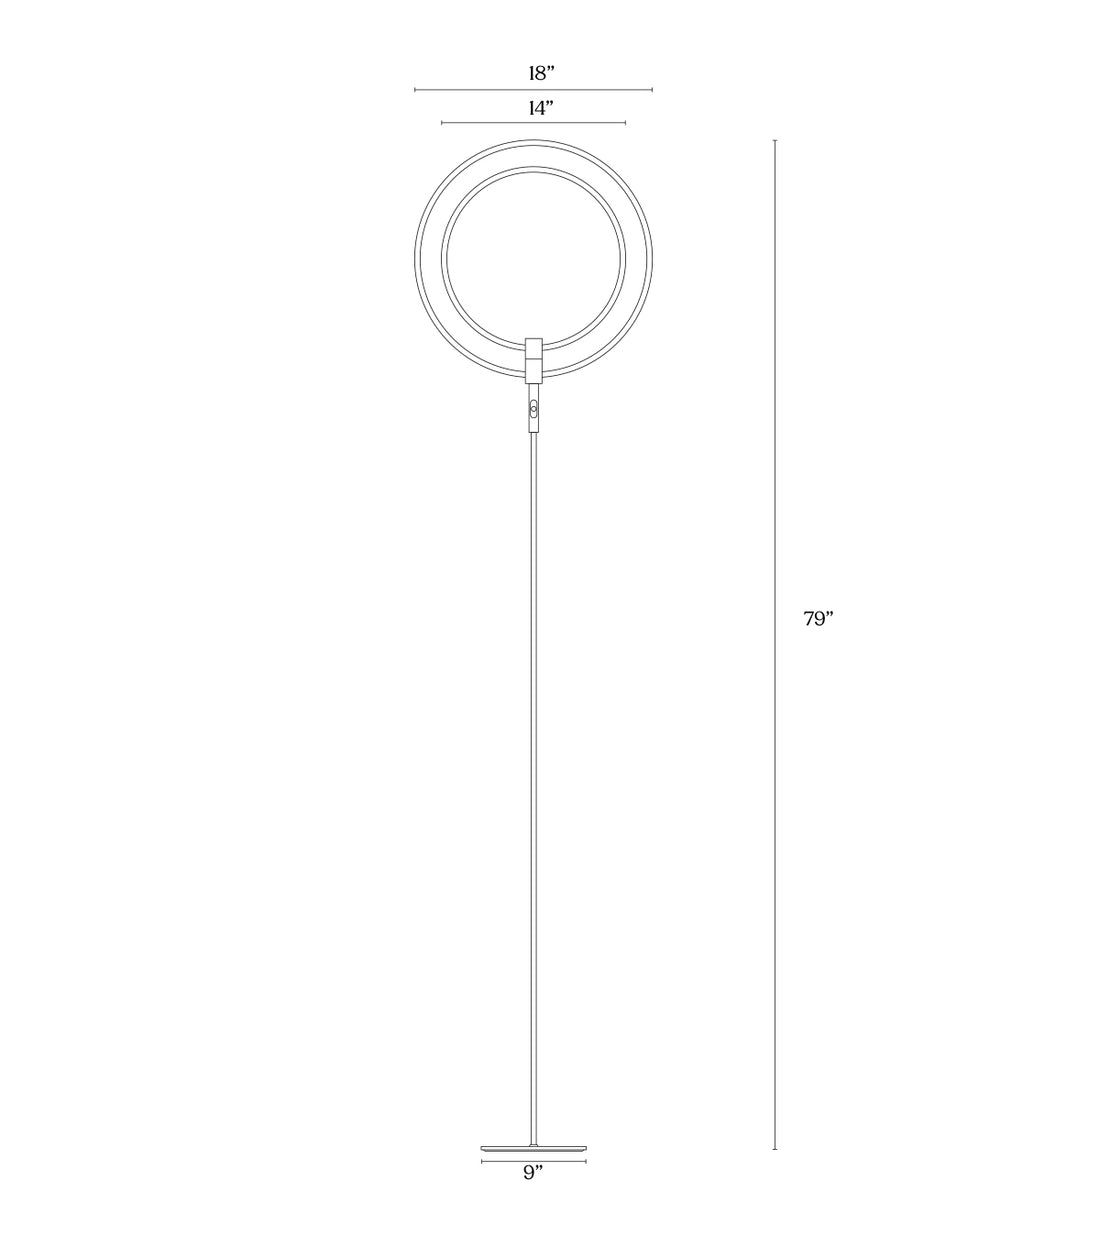 Brightech Eclipse Modern LED Torchiere Floor Lamp - Very High Brightness, Indoor Lamp - Living Room Standing Light - Alternative to Halogen - Built in Touch Dimmer